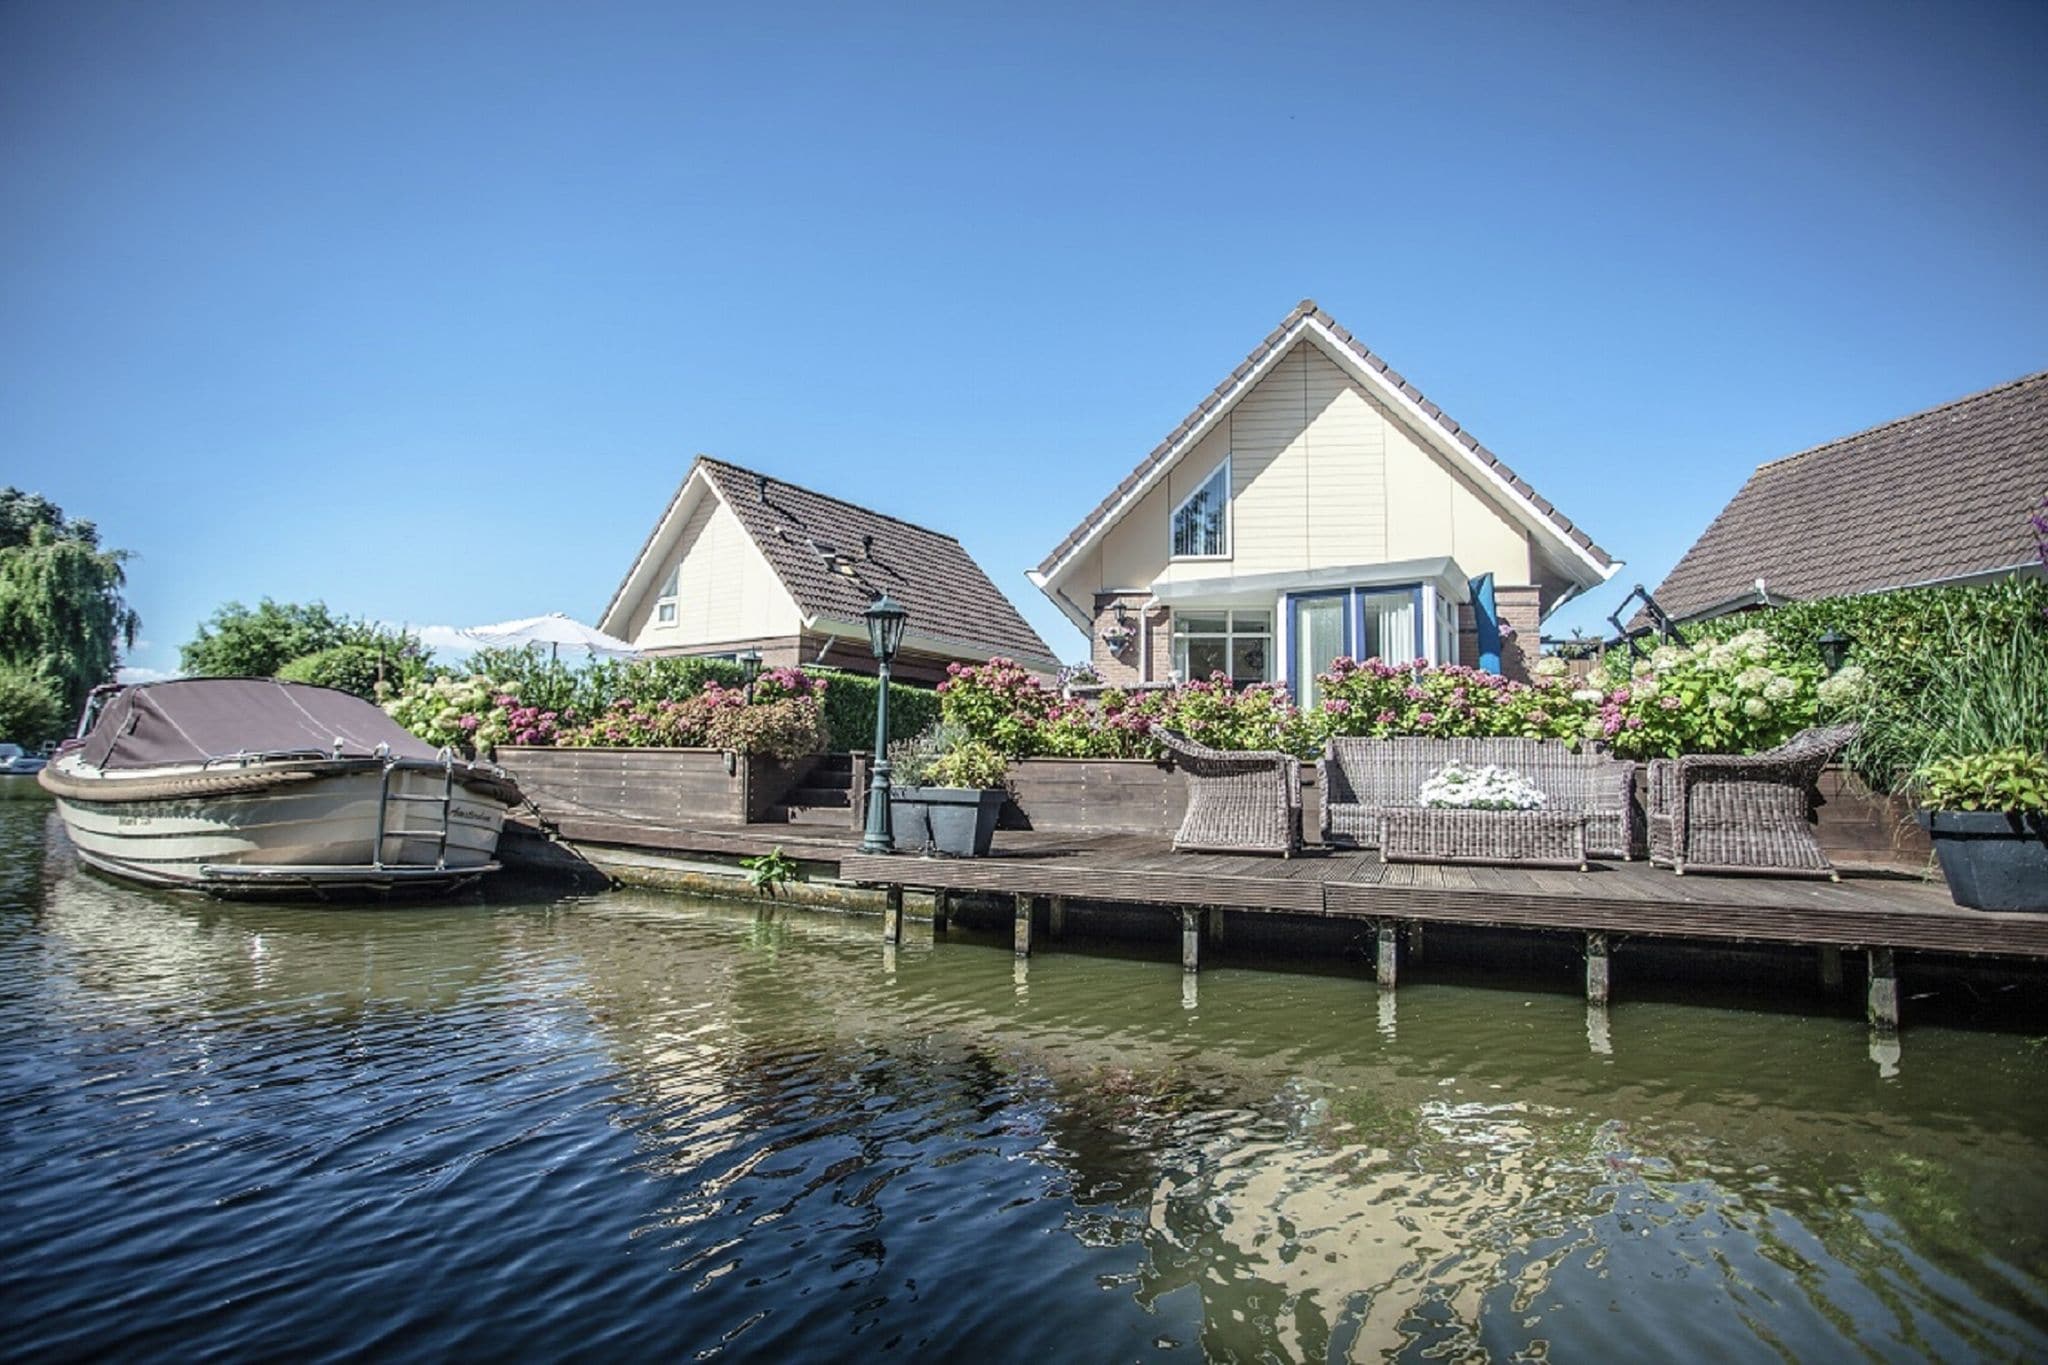 Lovely holiday home with jetty near IJsselmeer